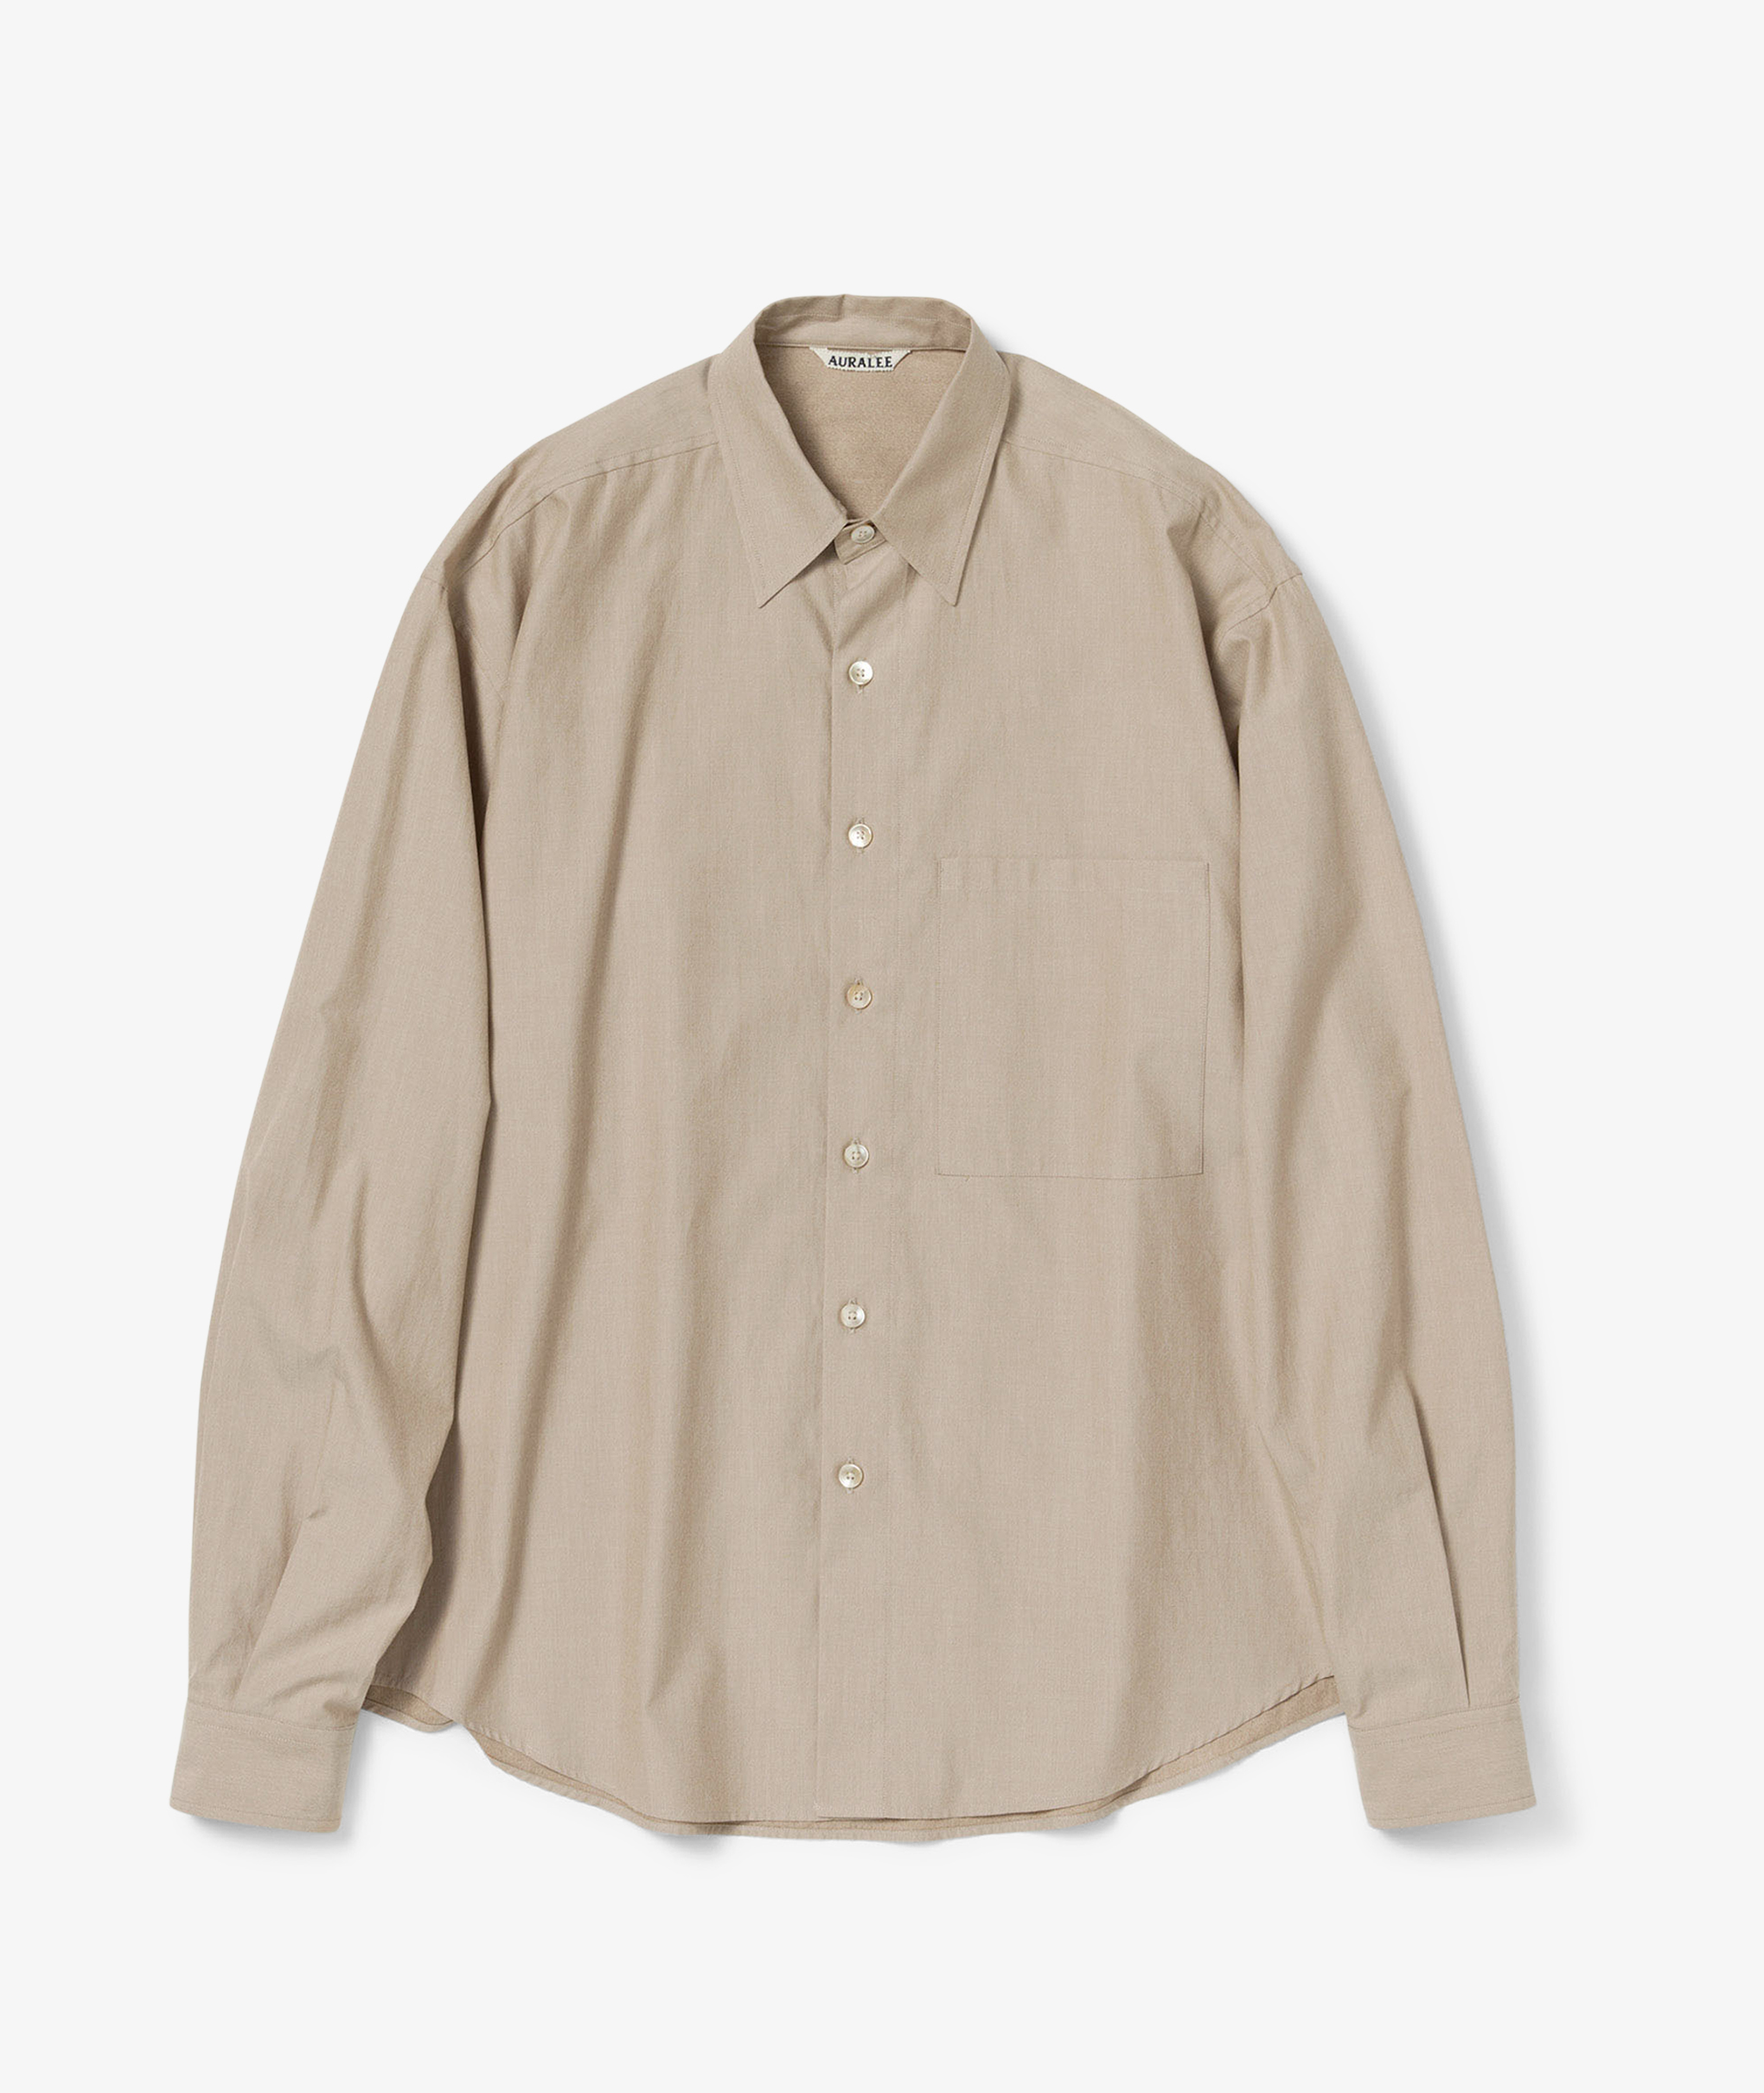 Norse Store | Shipping Worldwide - Auralee Washed Finx Twill Big 